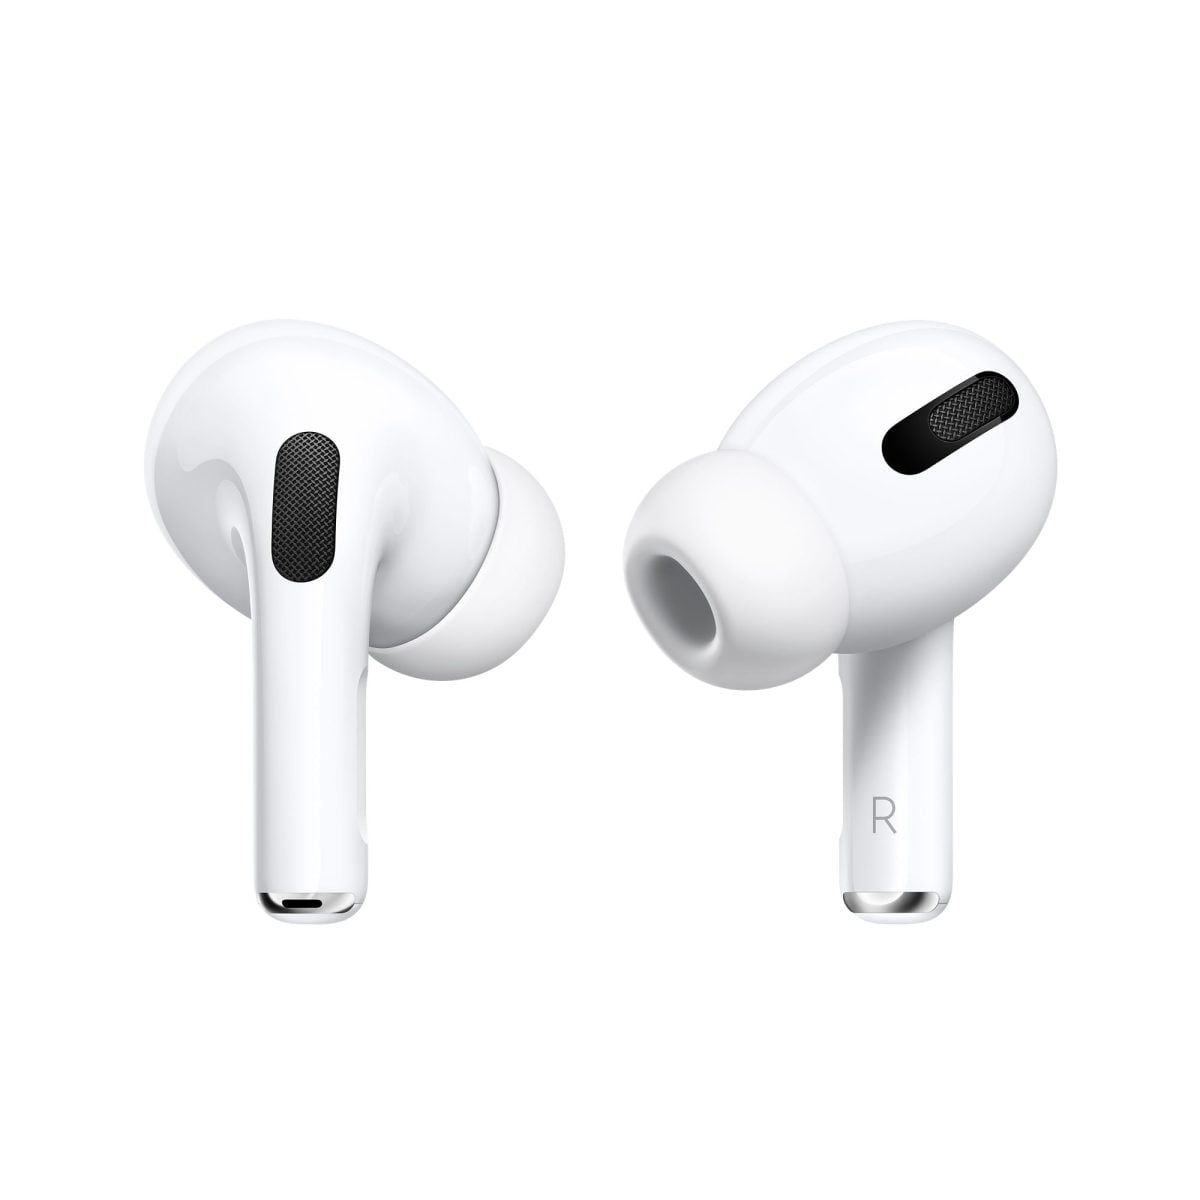 Mwp22 Av1 Apple &Lt;Div Class=&Quot;Rc-Pdsection-Sidepanel Column Large-3 Small-12&Quot;&Gt; &Lt;H1&Gt;Apple Airpods Pro (With Magsafe Charging Case) - White&Lt;/H1&Gt; &Lt;/Div&Gt; &Lt;Div Class=&Quot;Rc-Pdsection-Mainpanel Column Large-9 Small-12&Quot;&Gt; &Lt;H4 Class=&Quot;H4-Para-Title&Quot;&Gt;Magic Like You’ve Never Heard&Lt;/H4&Gt; &Lt;Div Class=&Quot;Para-List As-Pdp-Lastparalist&Quot;&Gt; Airpods Pro Have Been Designed To Deliver Active Noise Cancellation For Immersive Sound, Transparency Mode So You Can Hear Your Surroundings, And A Customizable Fit For All-Day Comfort. Just Like Airpods, Airpods Pro Connect Magically To Your Apple Devices. And They’re Ready To Use Right Out Of The Case. &Lt;/Div&Gt; &Lt;/Div&Gt; Airpods Pro Apple Airpods Pro (With Magsafe Charging Case) - White Mlwk3